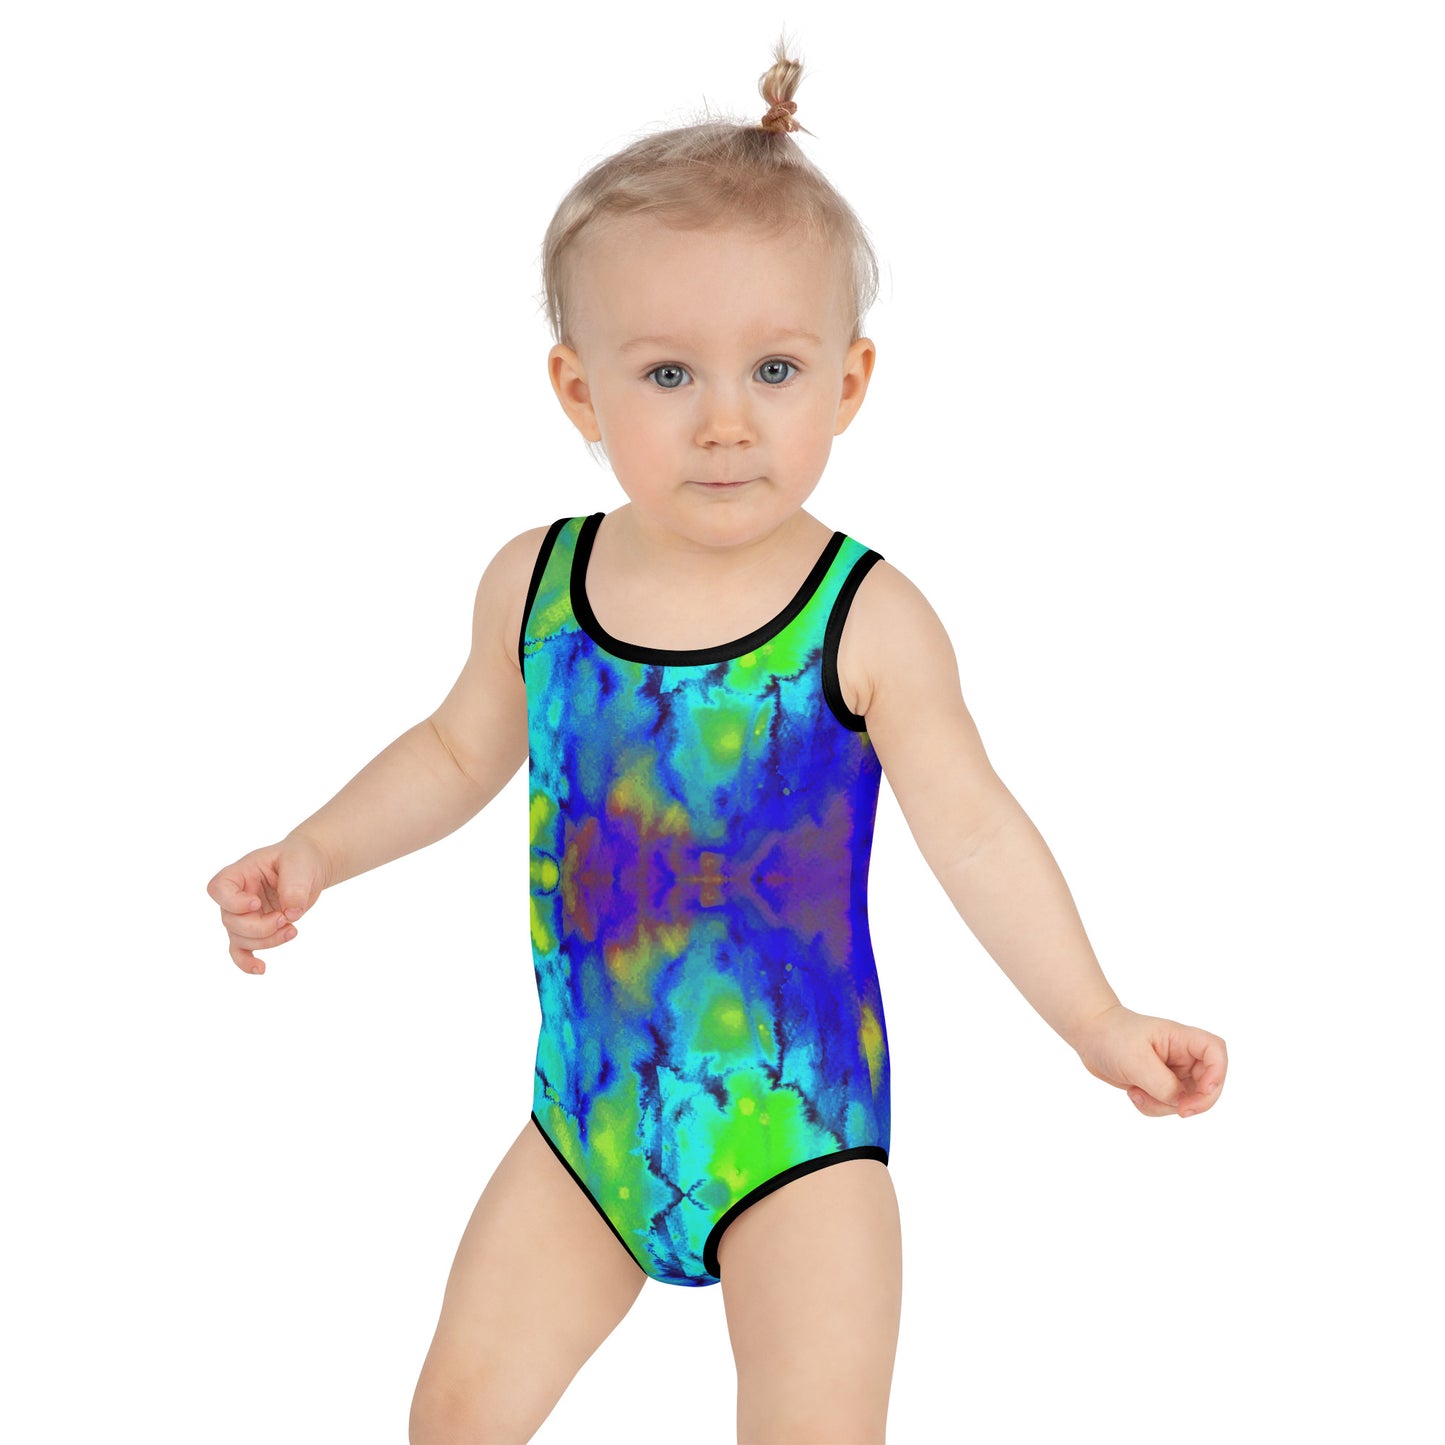 AutPop's Critters Meep Abstract All-Over Print Kids Swimsuit